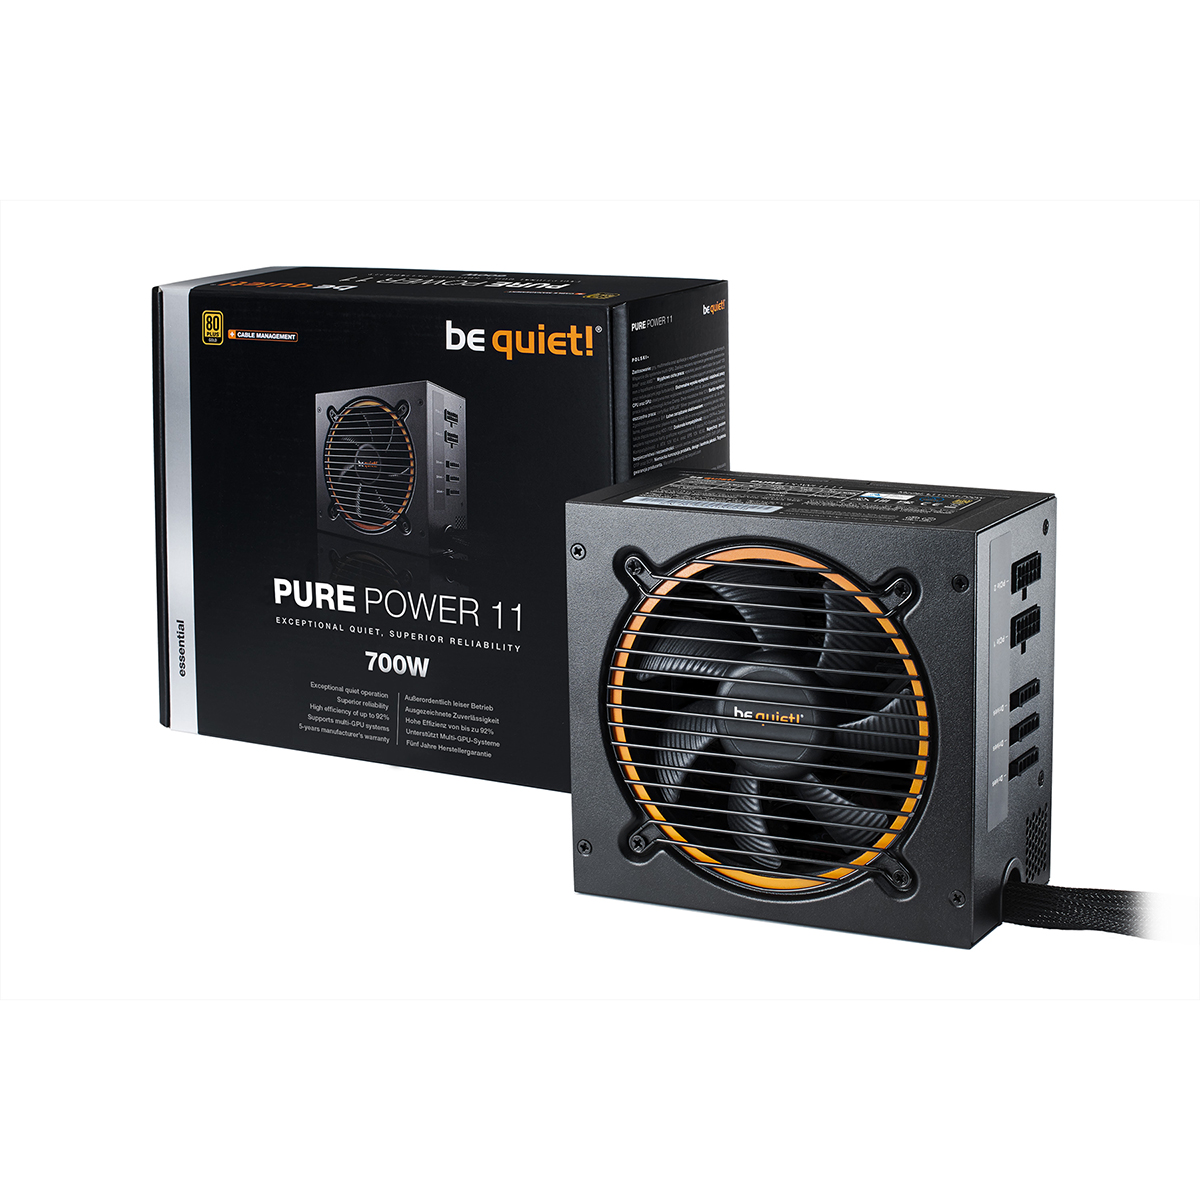 be quiet! - be quiet Pure Power 11 700W 80 Plus Gold Modular Power Supply